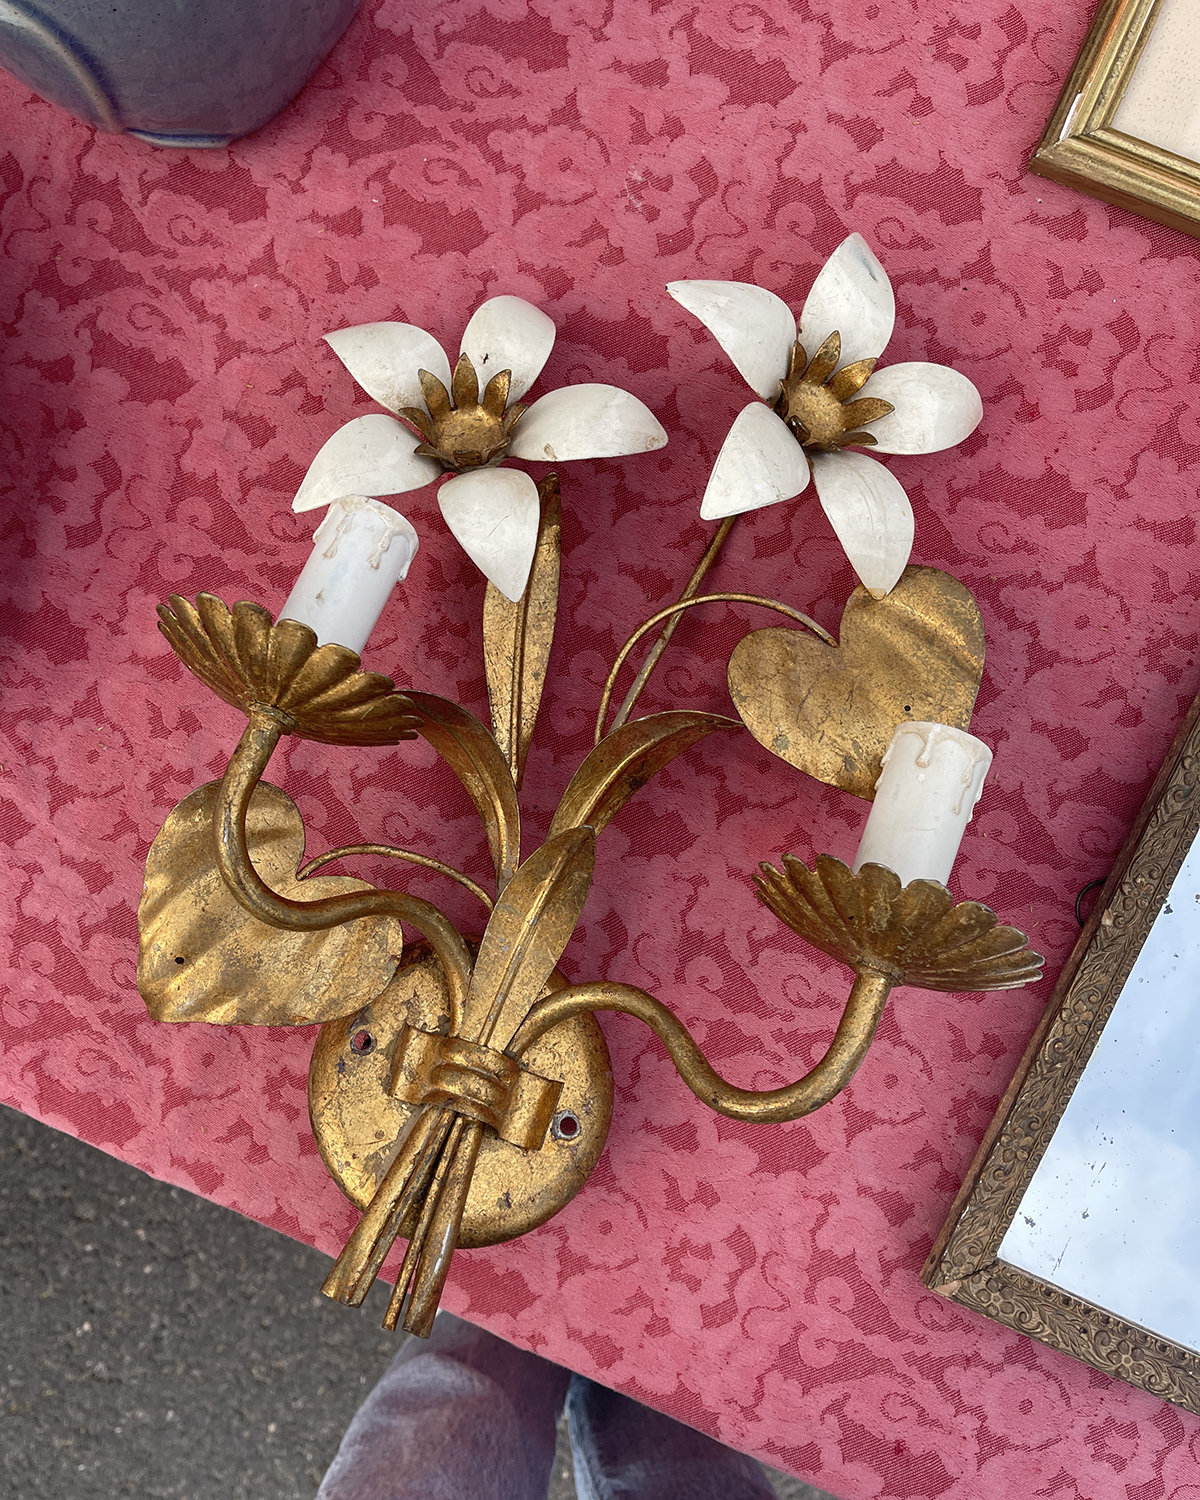 Flower sconce at French flea